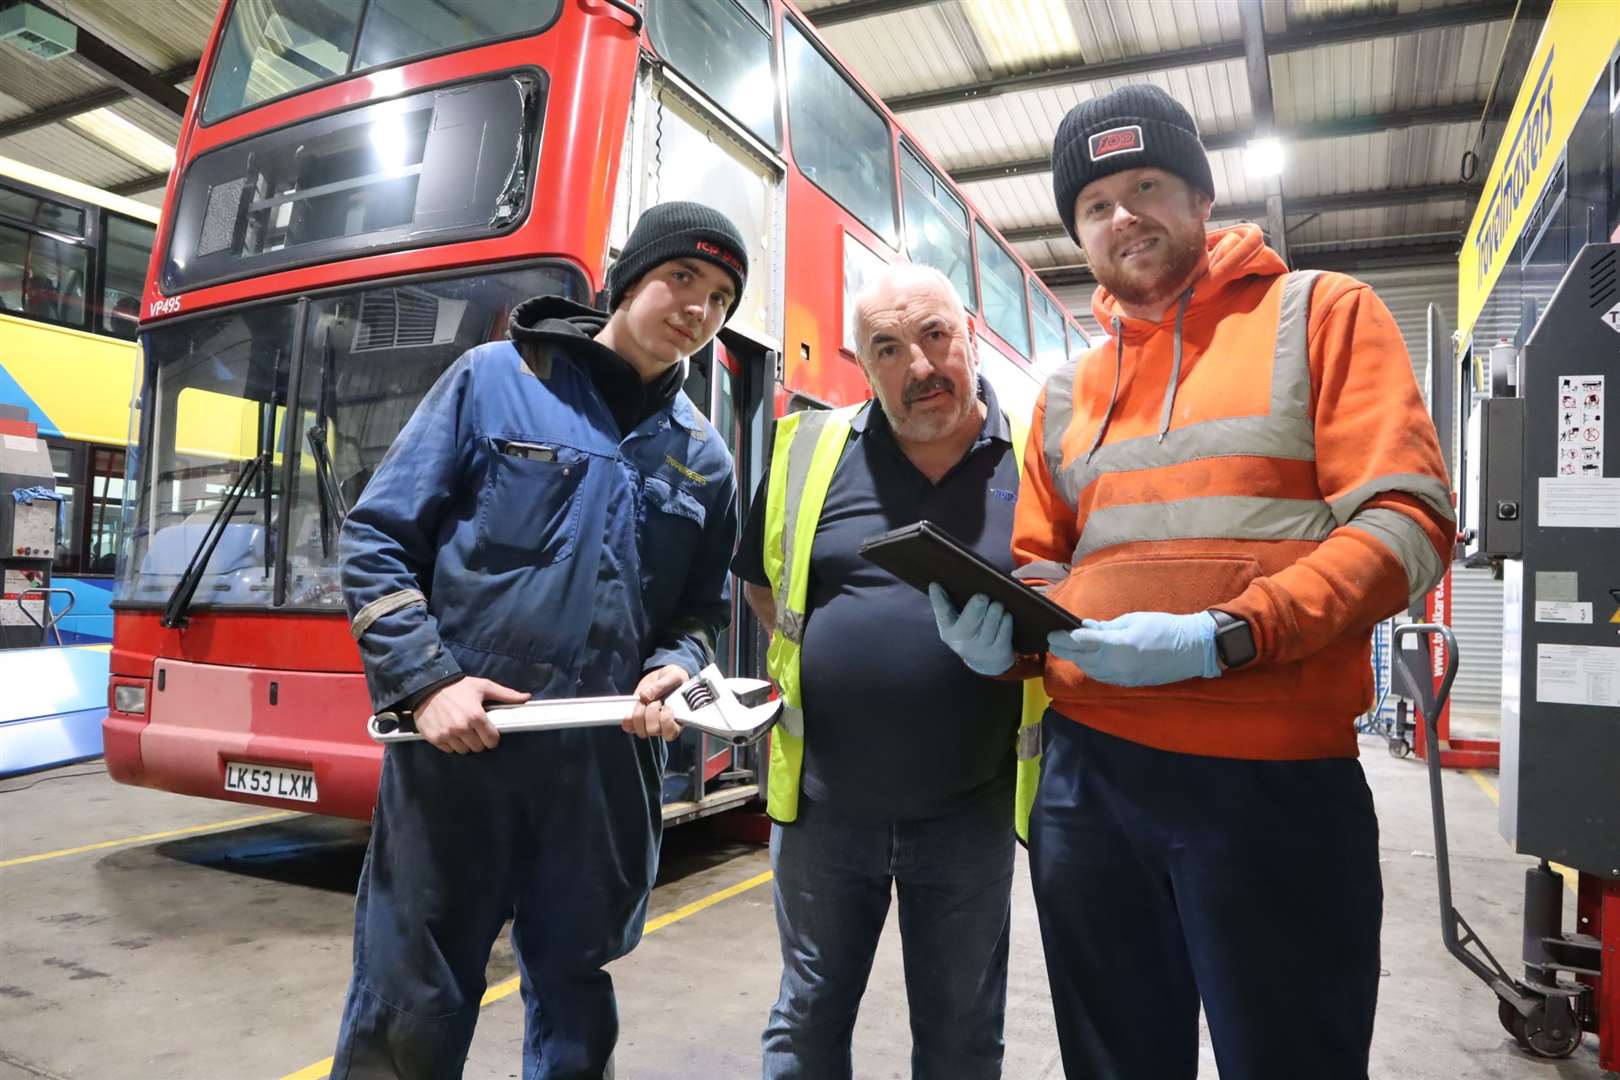 Getting the Sheppey community bus on the road: Tim Lambkin (centre) of Travelmasters with his engineer son Callum, left, and son-in-law James Chisman. Picture: John Nurden